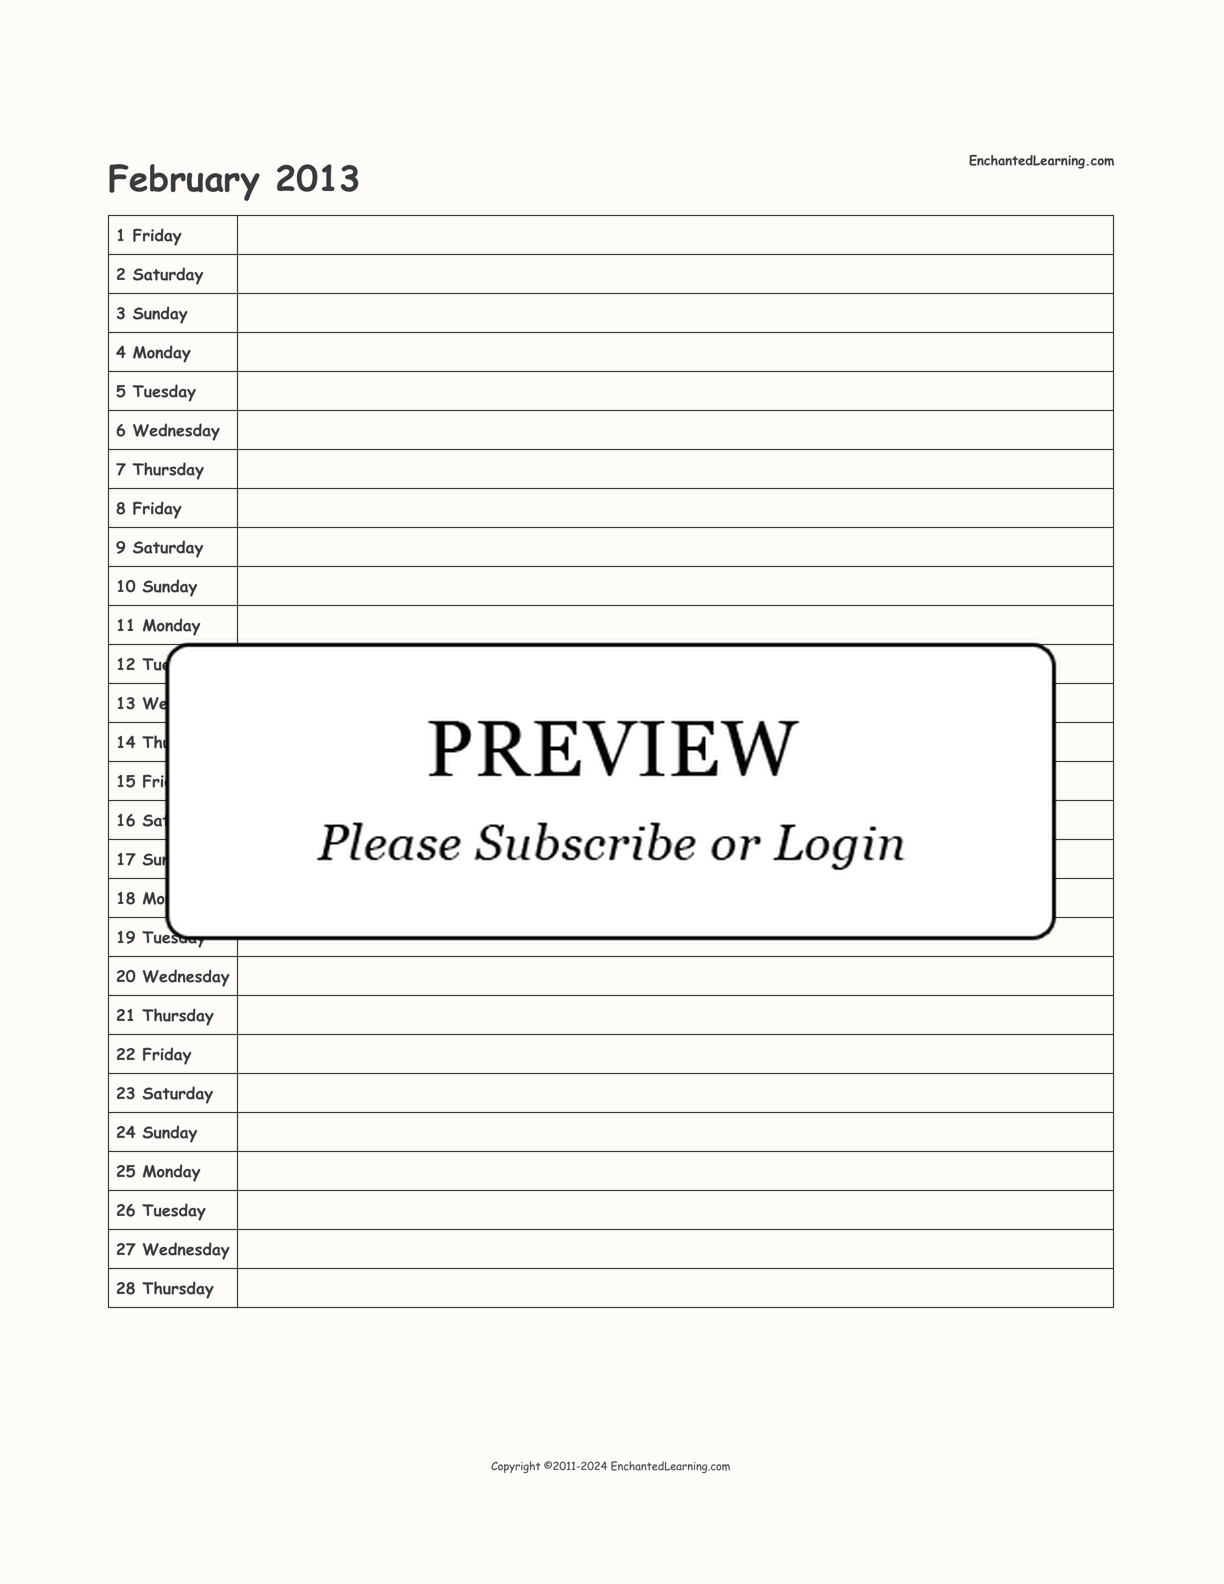 2013 Scheduling Calendar interactive printout page 2